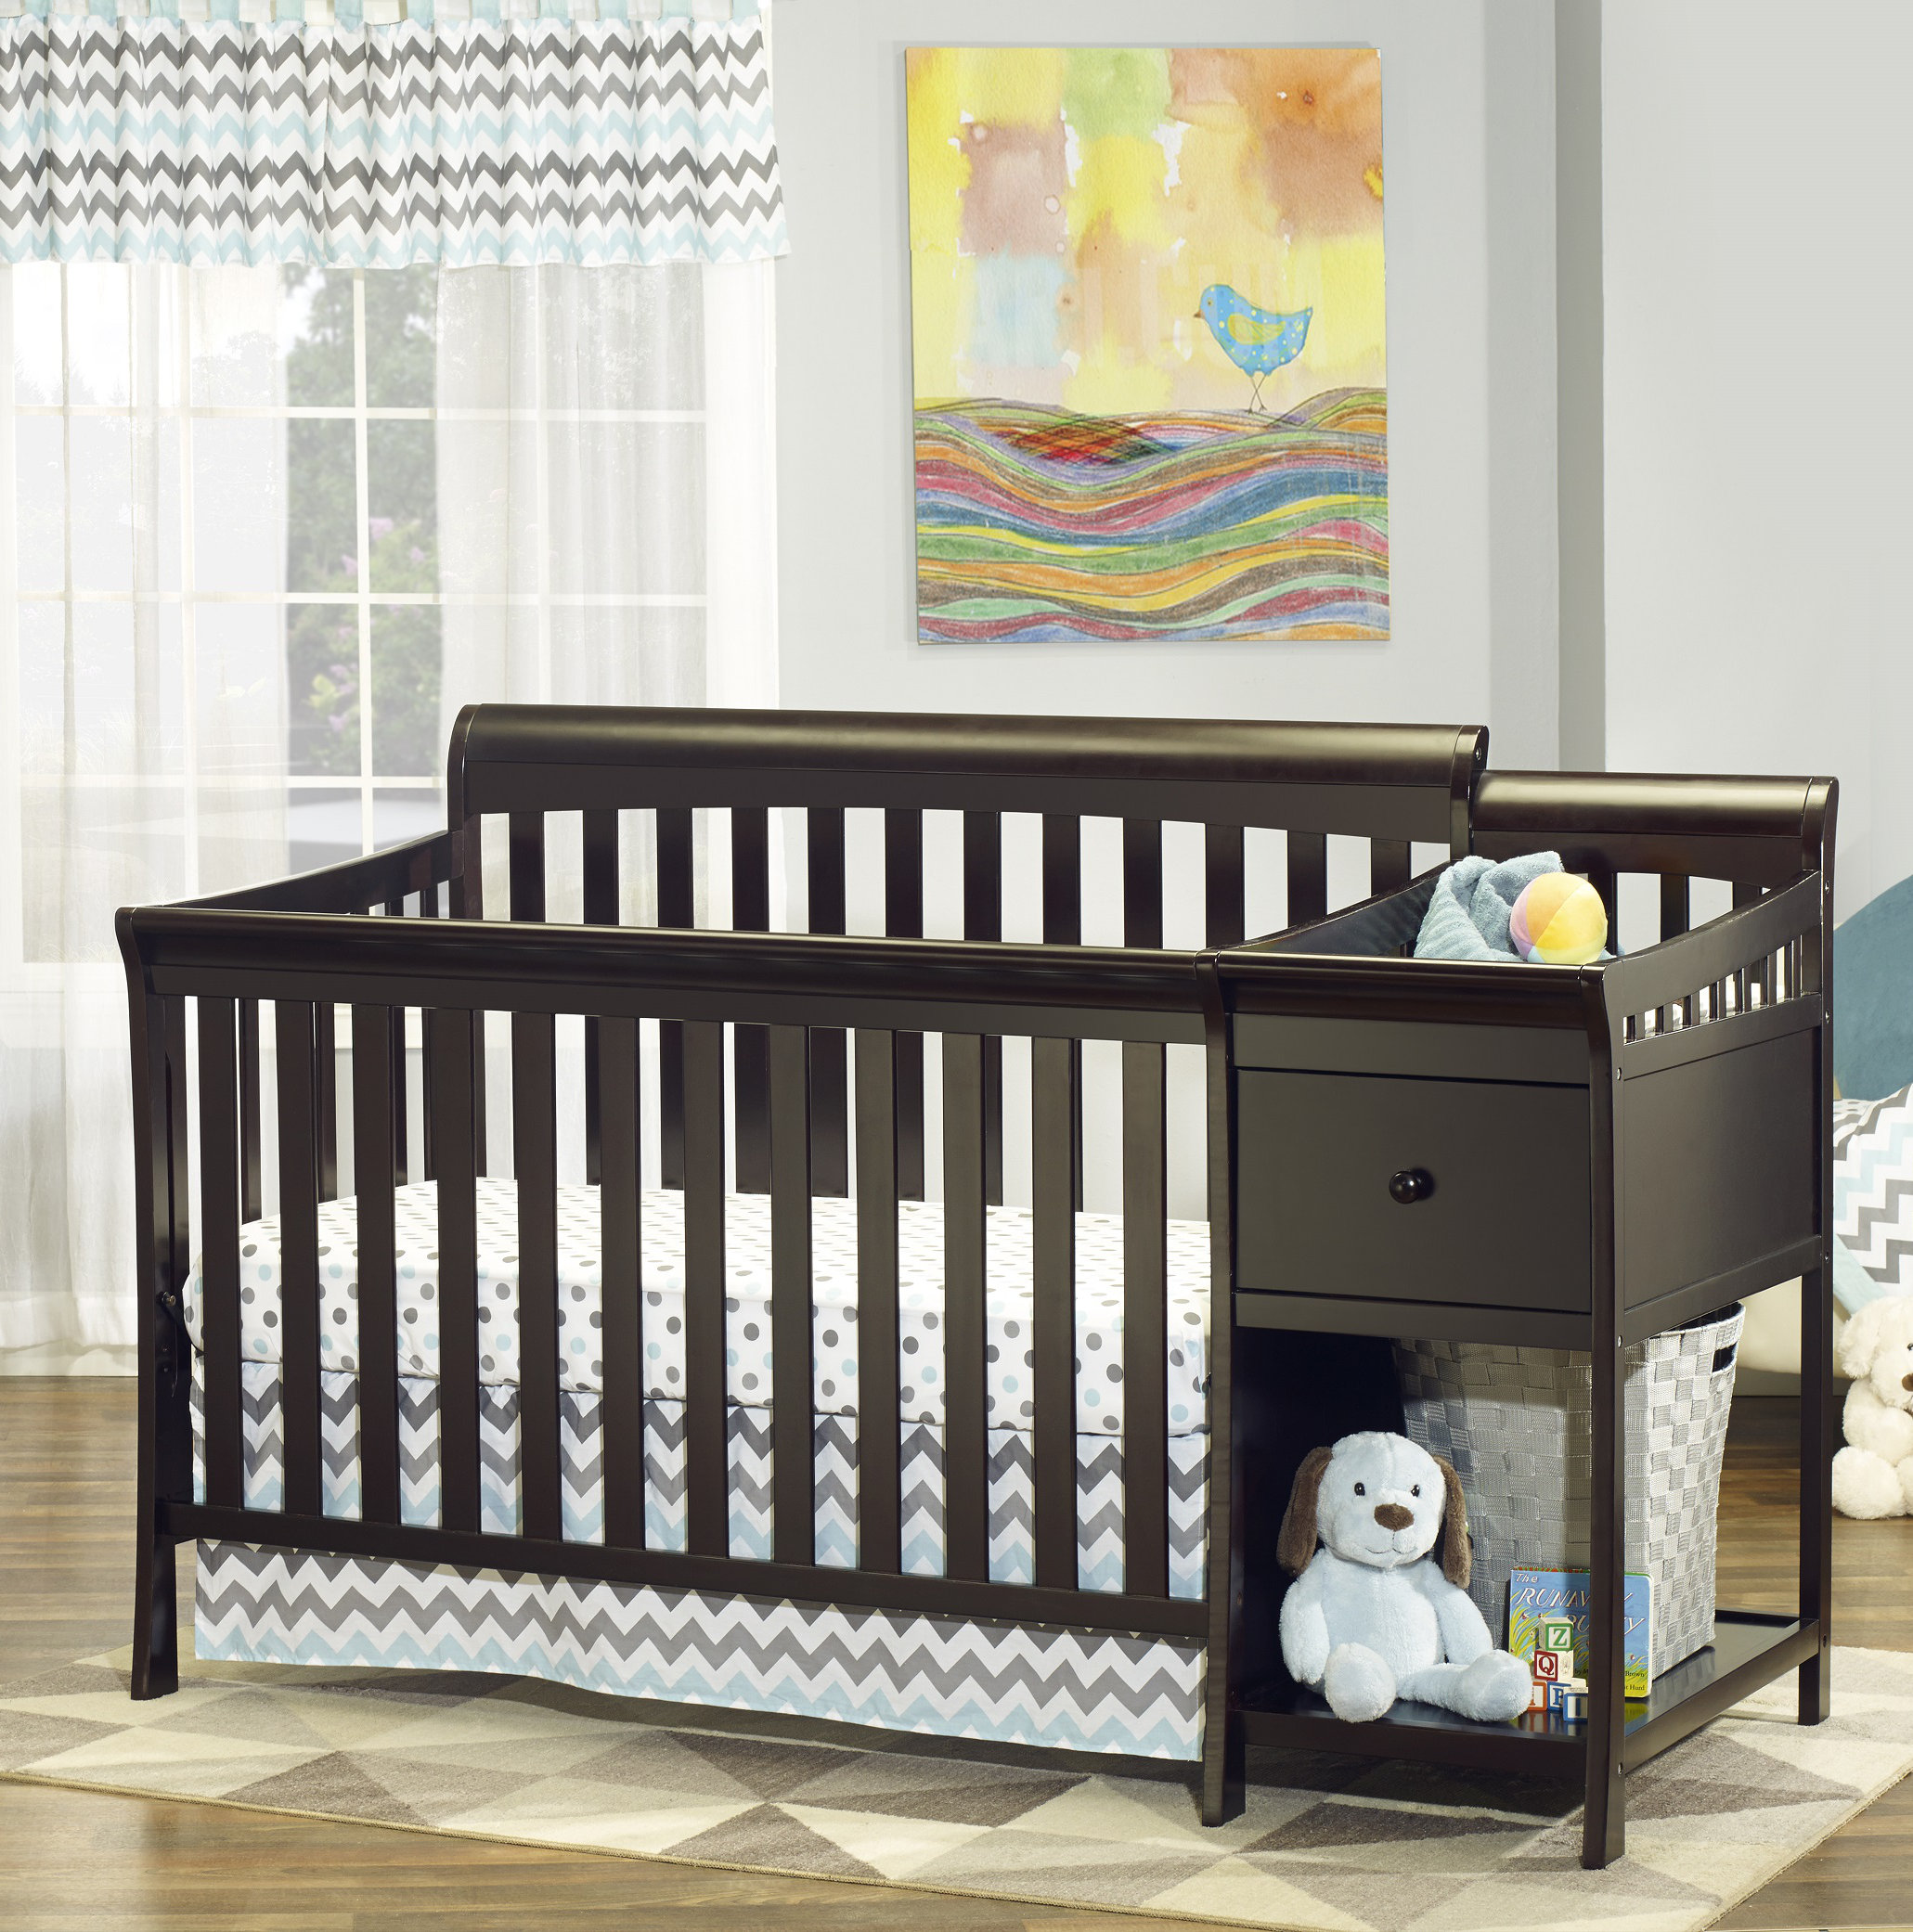 white and pine cot